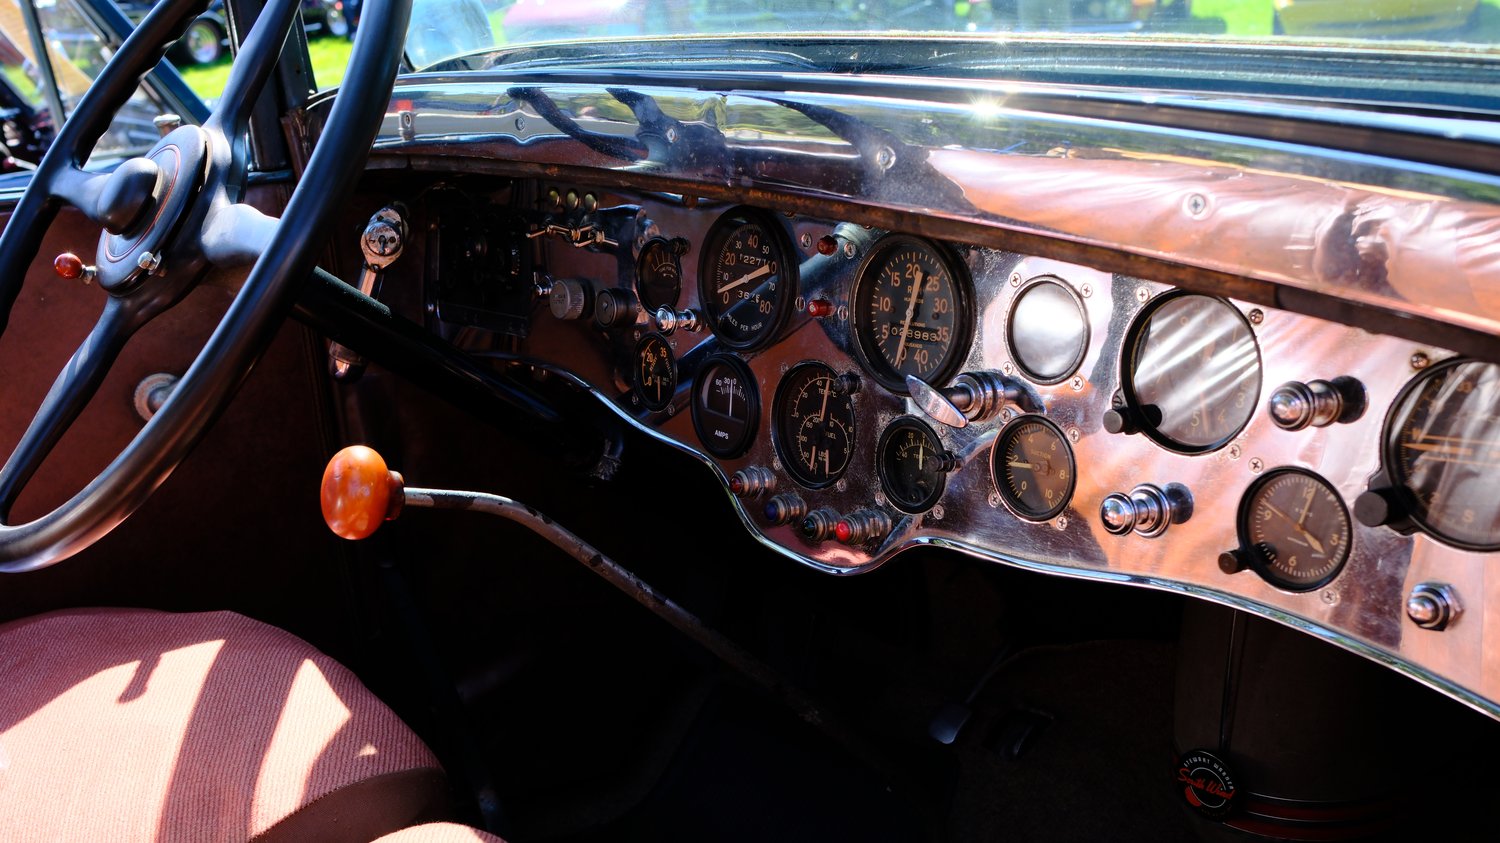 Interior and dash of a 1930 Packard 740.